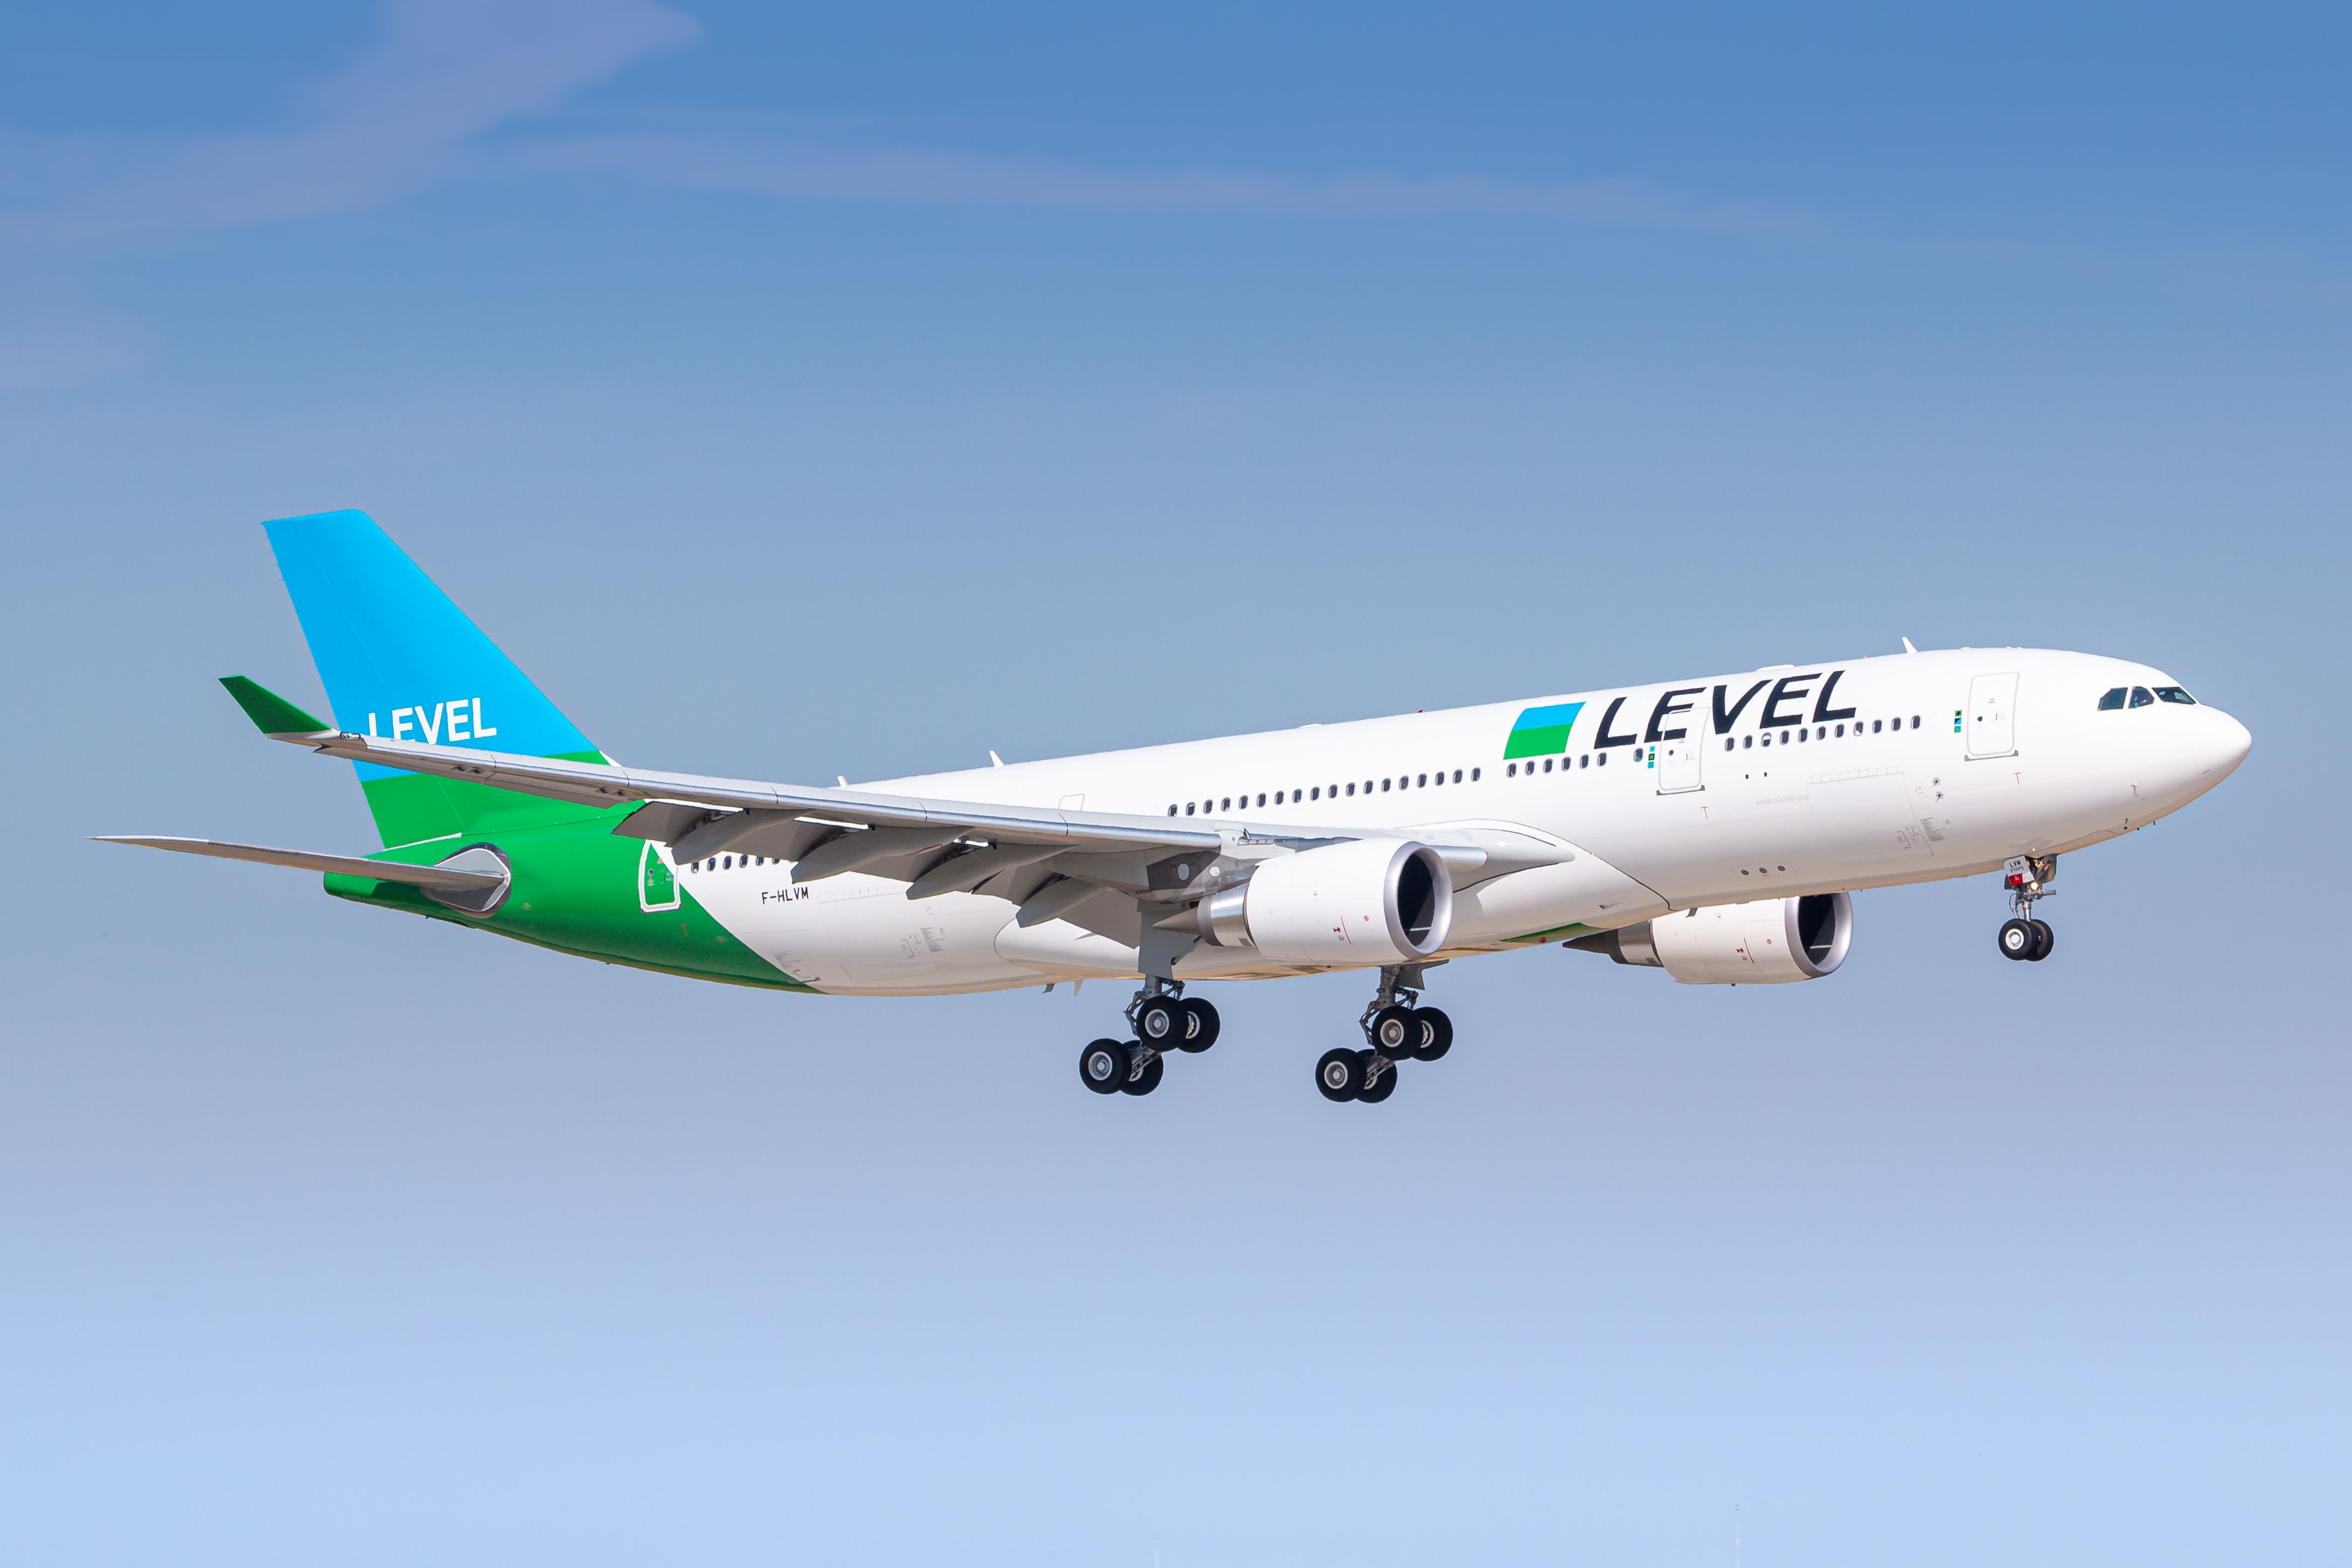 A Level Airbus A330 flying in the sky.